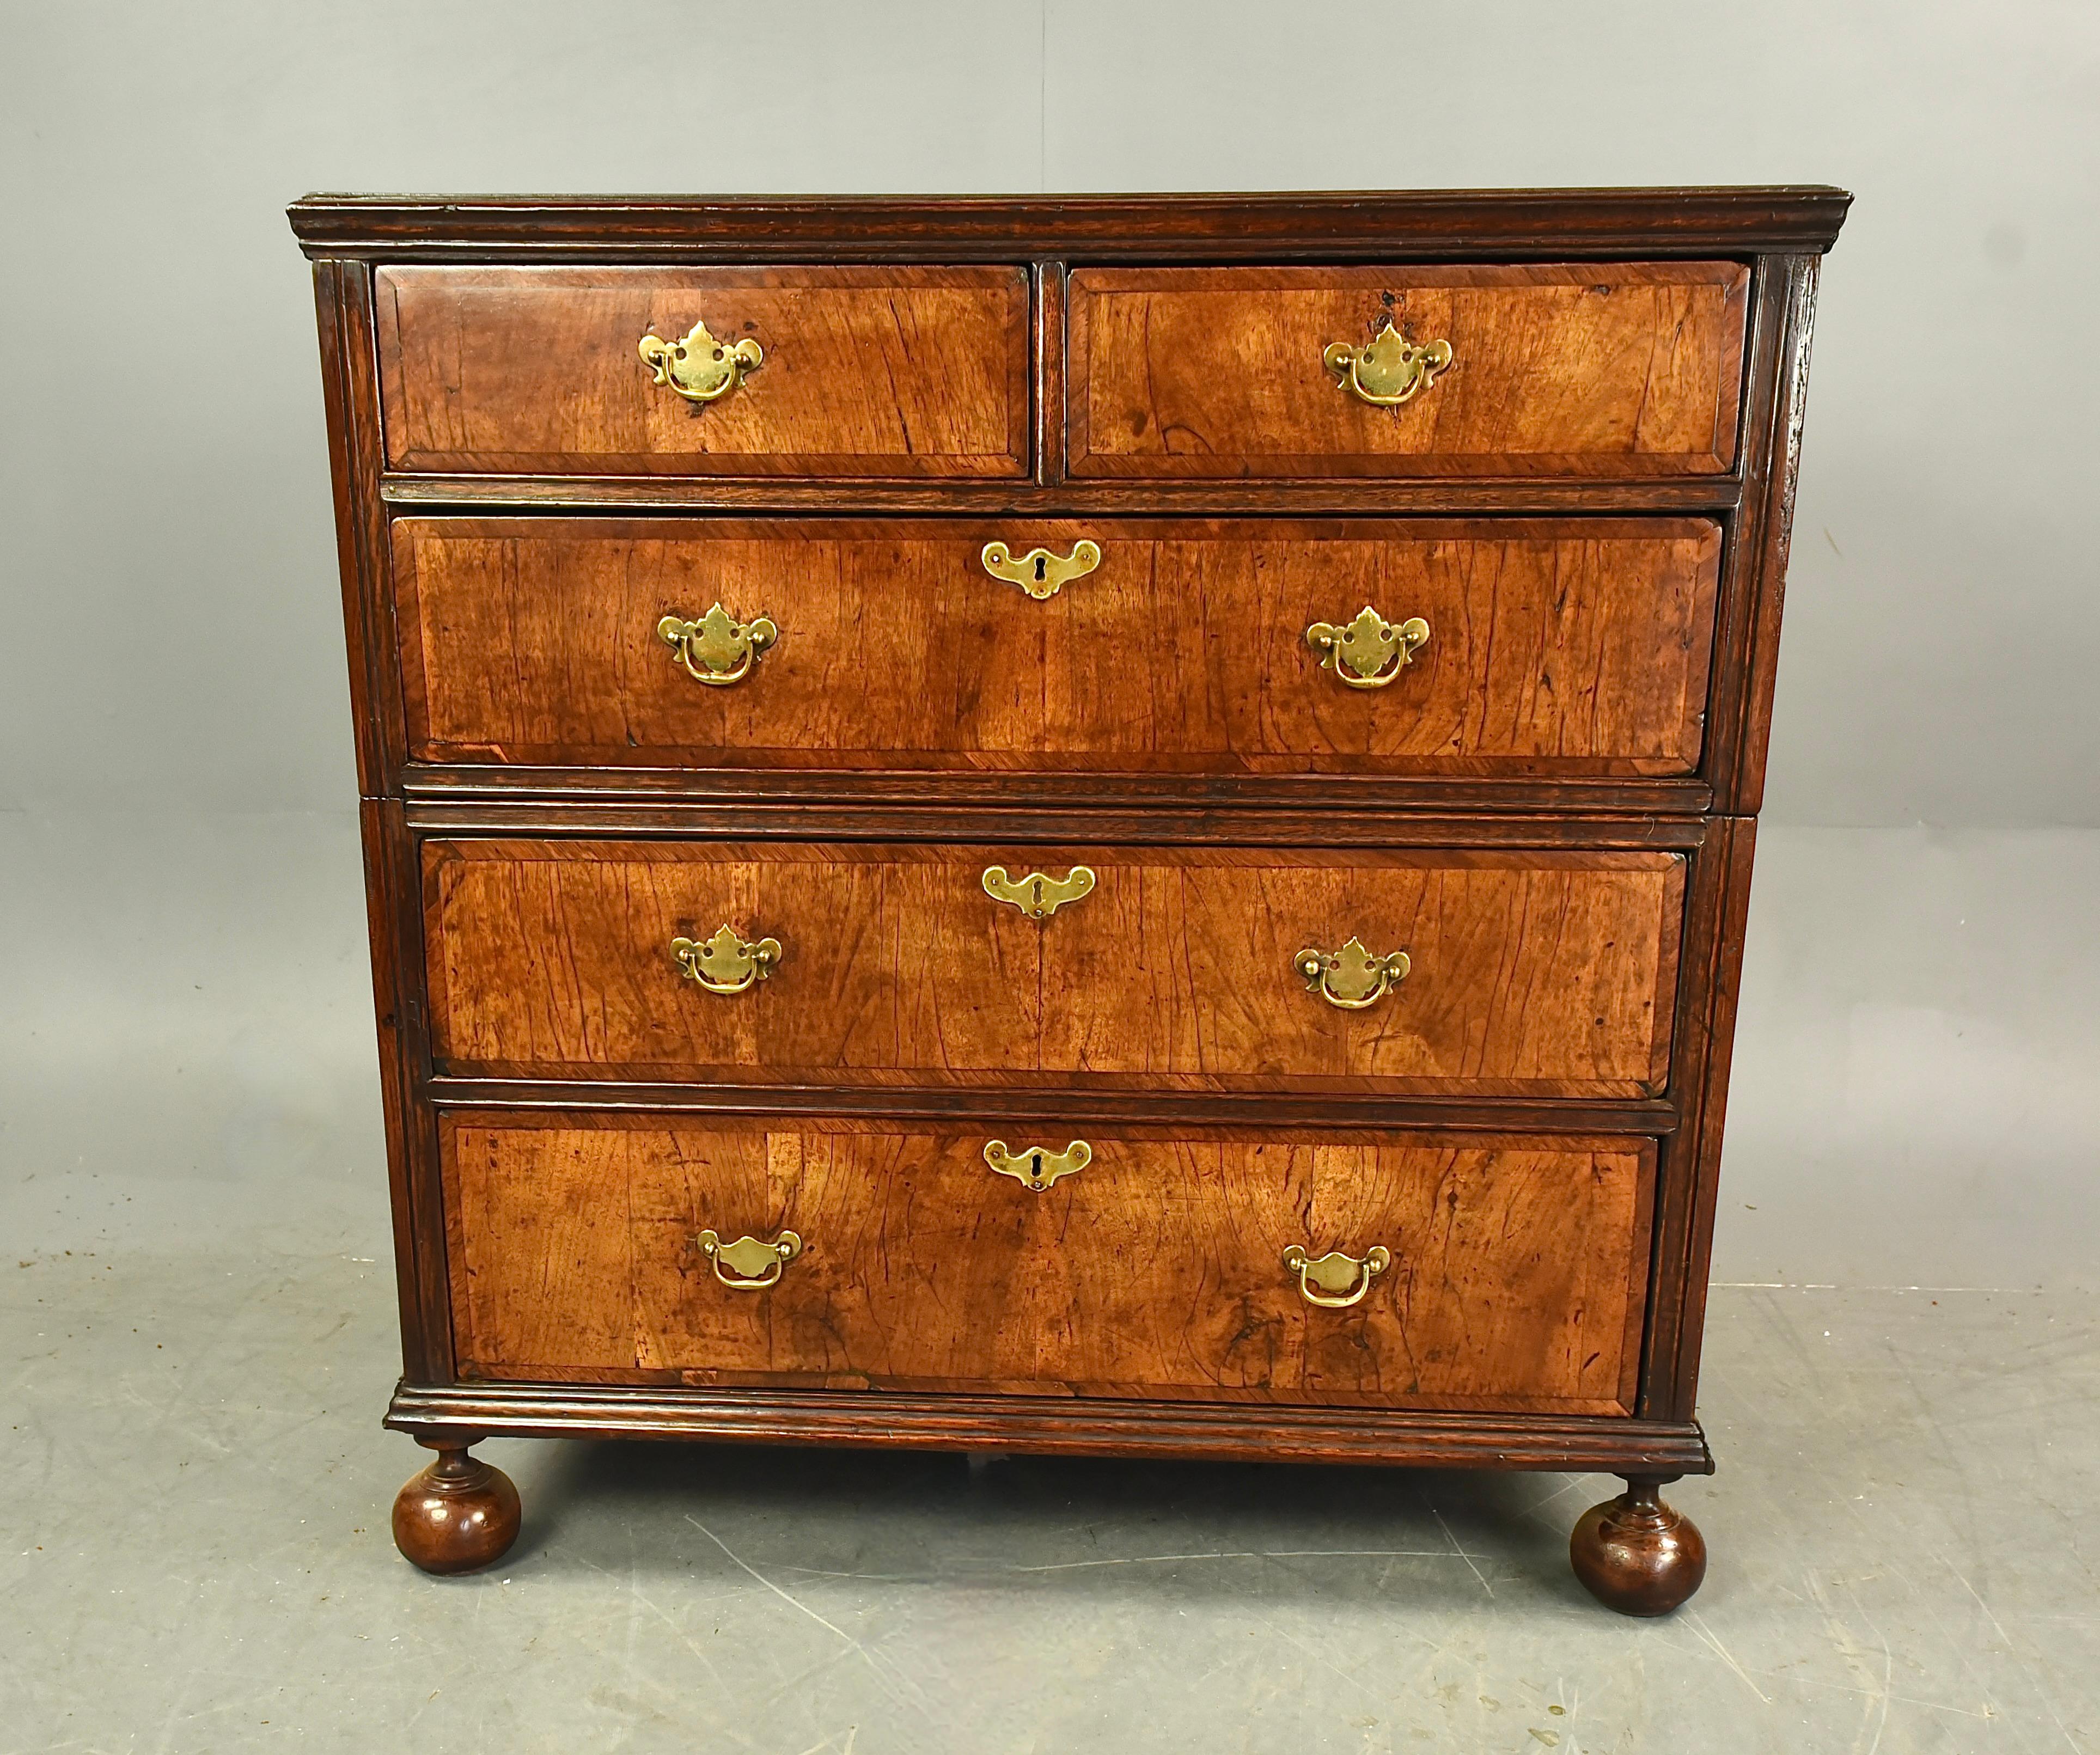 Fine early 18th century George 1st walnut chest of drawers circa 1720 .
The chest has five oak lined drawers that all have hand dovetail joints and are solid in joint .
The chest comes in two sections which is typical of the period ,It has brass